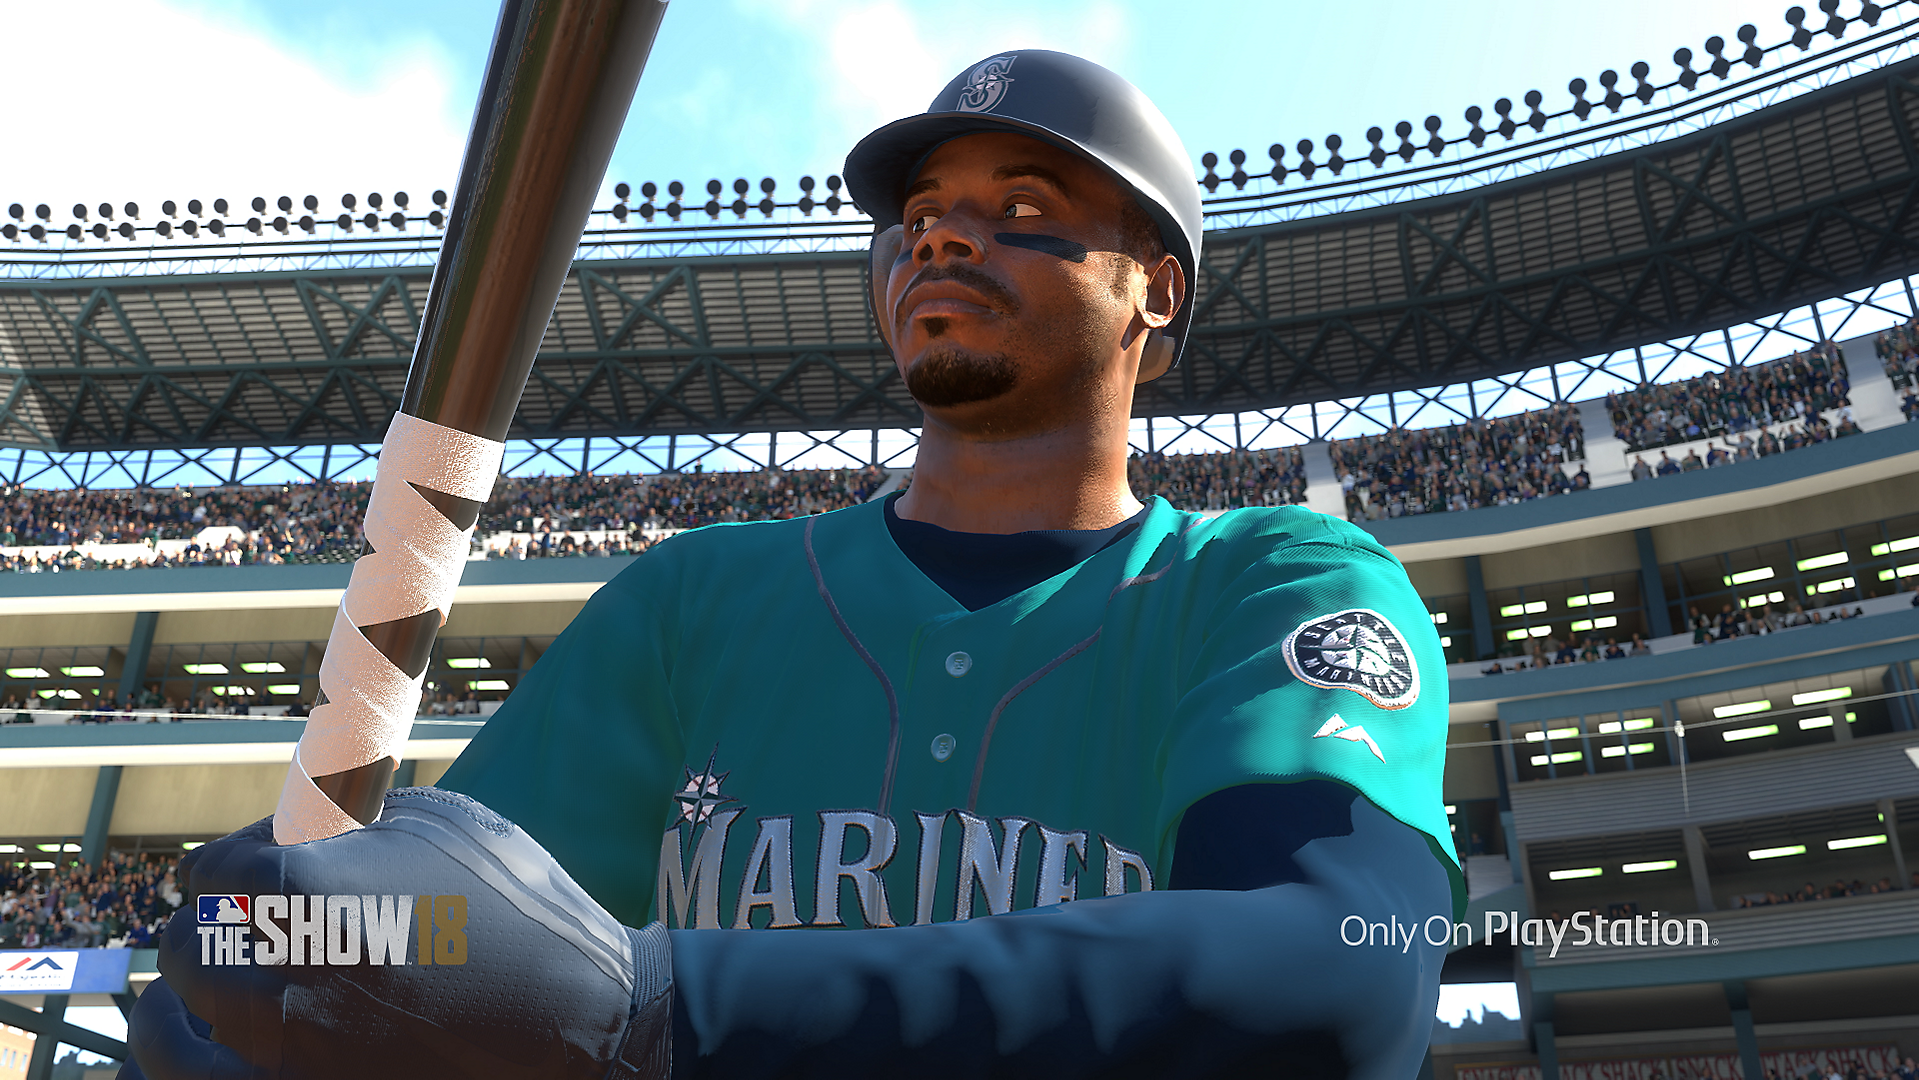 MLB The Show 18 